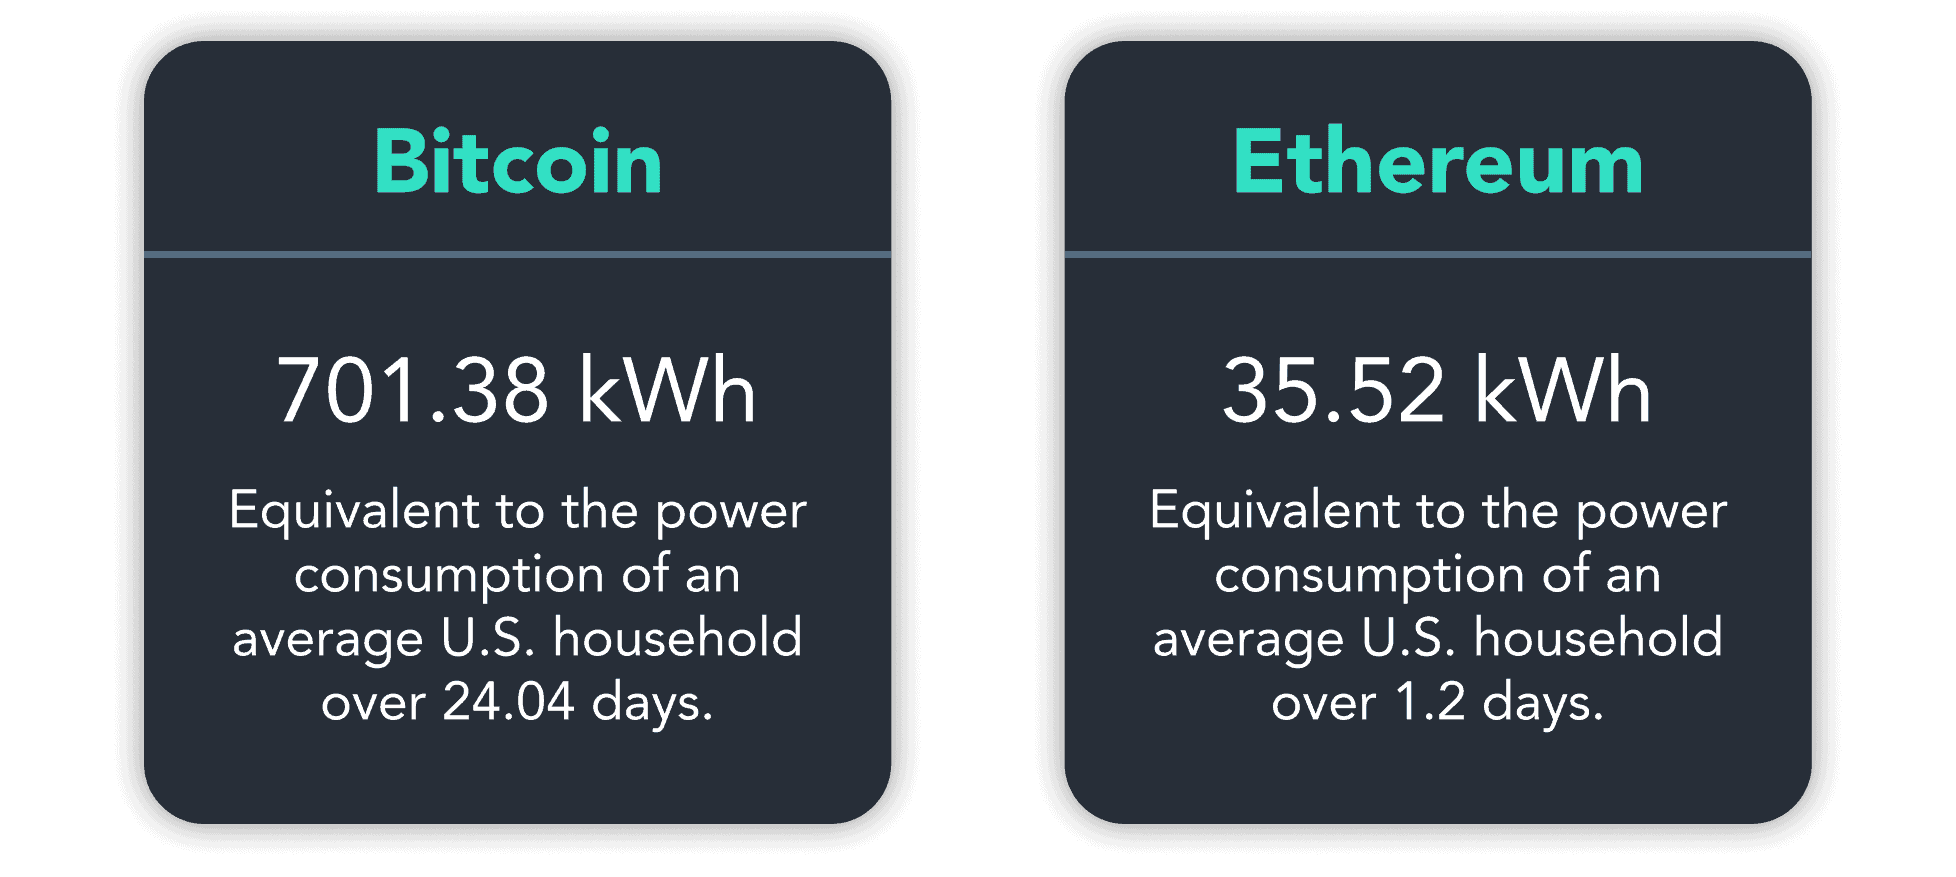 ethereum staking will consumption by